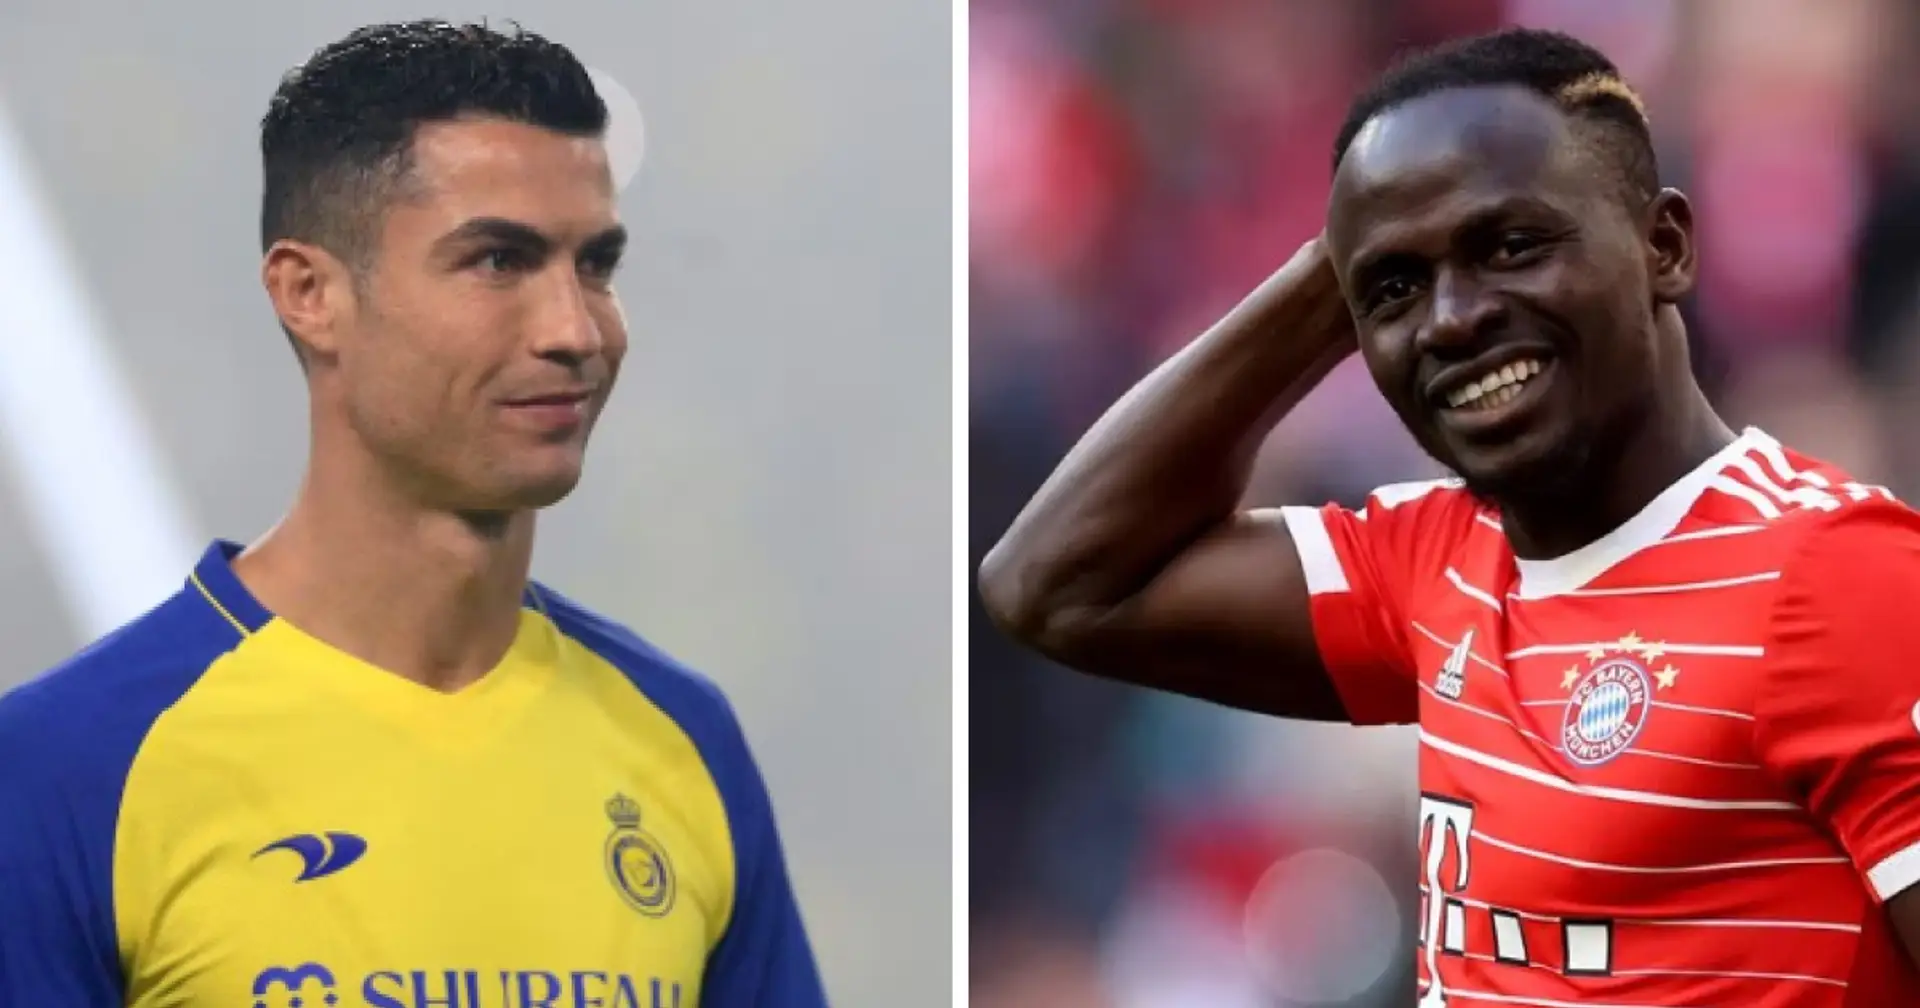 Sadio Mane could join Cristiano Ronaldo after a challenging season in Germany